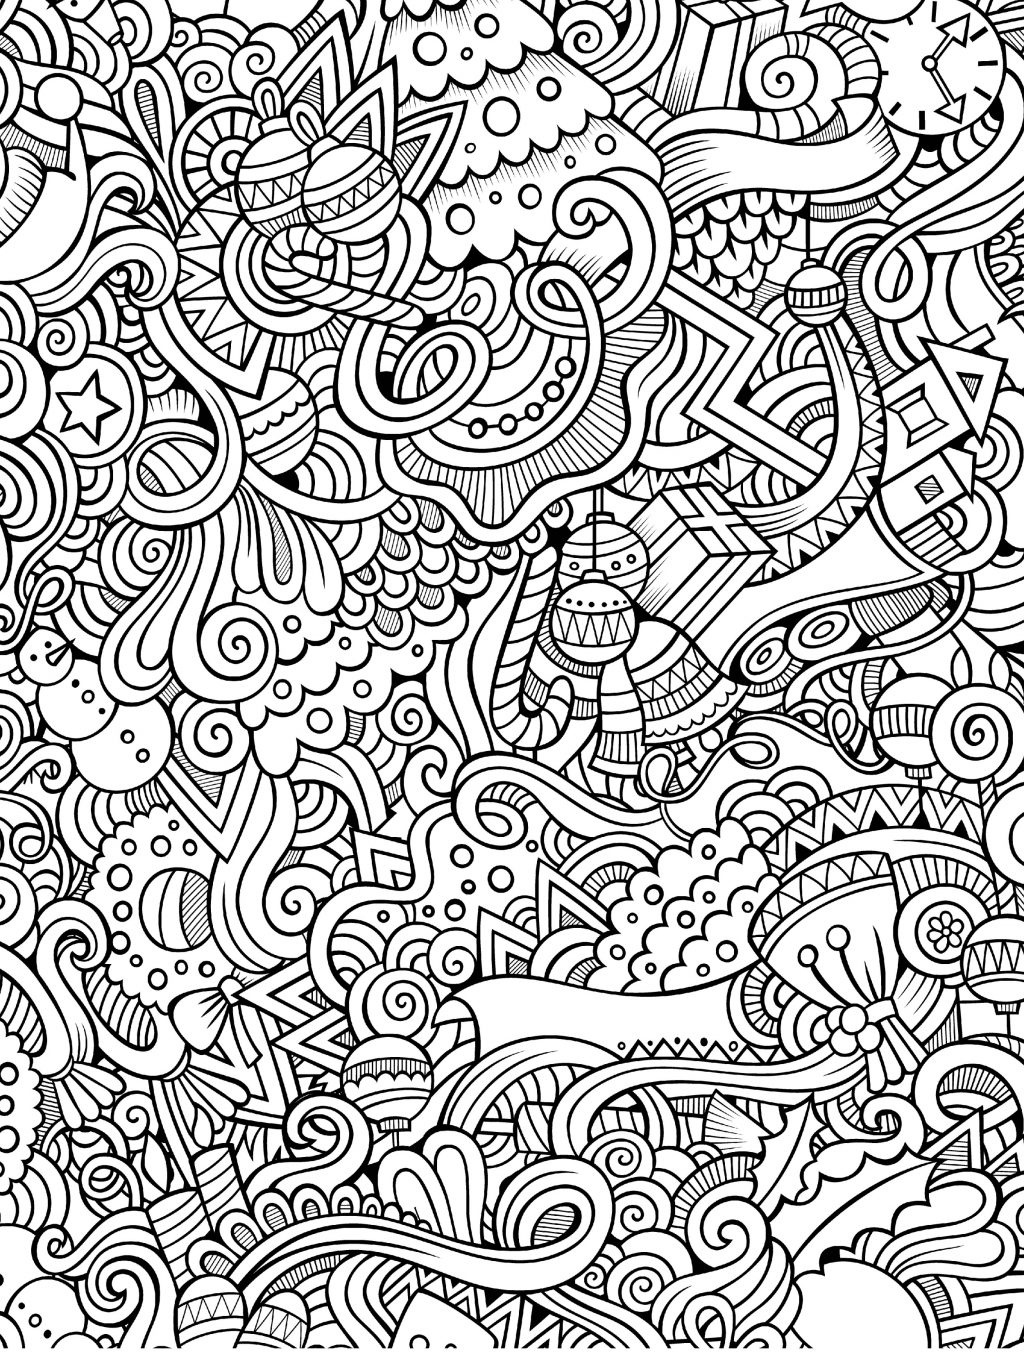 Coloring Ideas : Remarkable Printable Coloring Book Pages Sheets - Free Printable Coloring Book Pages For Adults